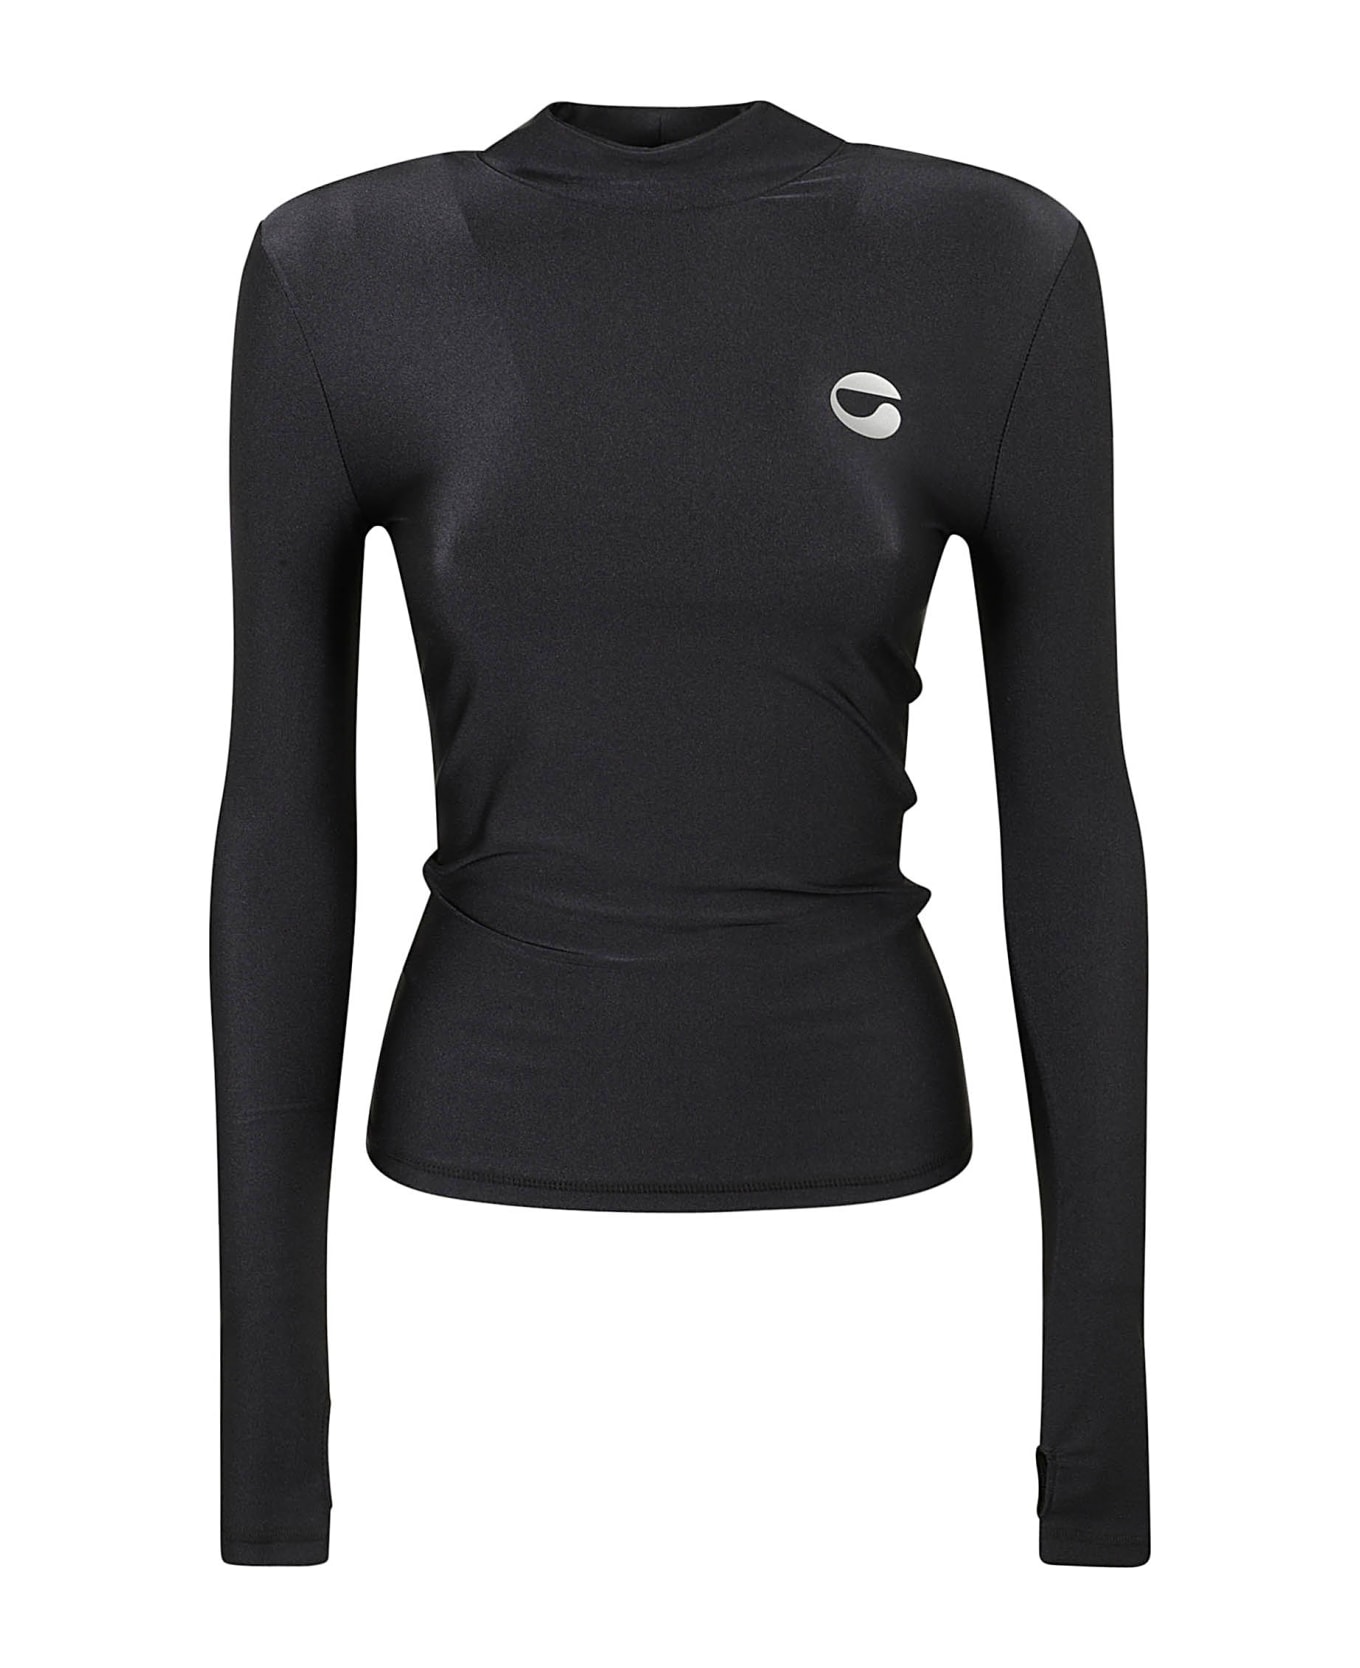 Coperni Fitted Long-sleeved Top - Black